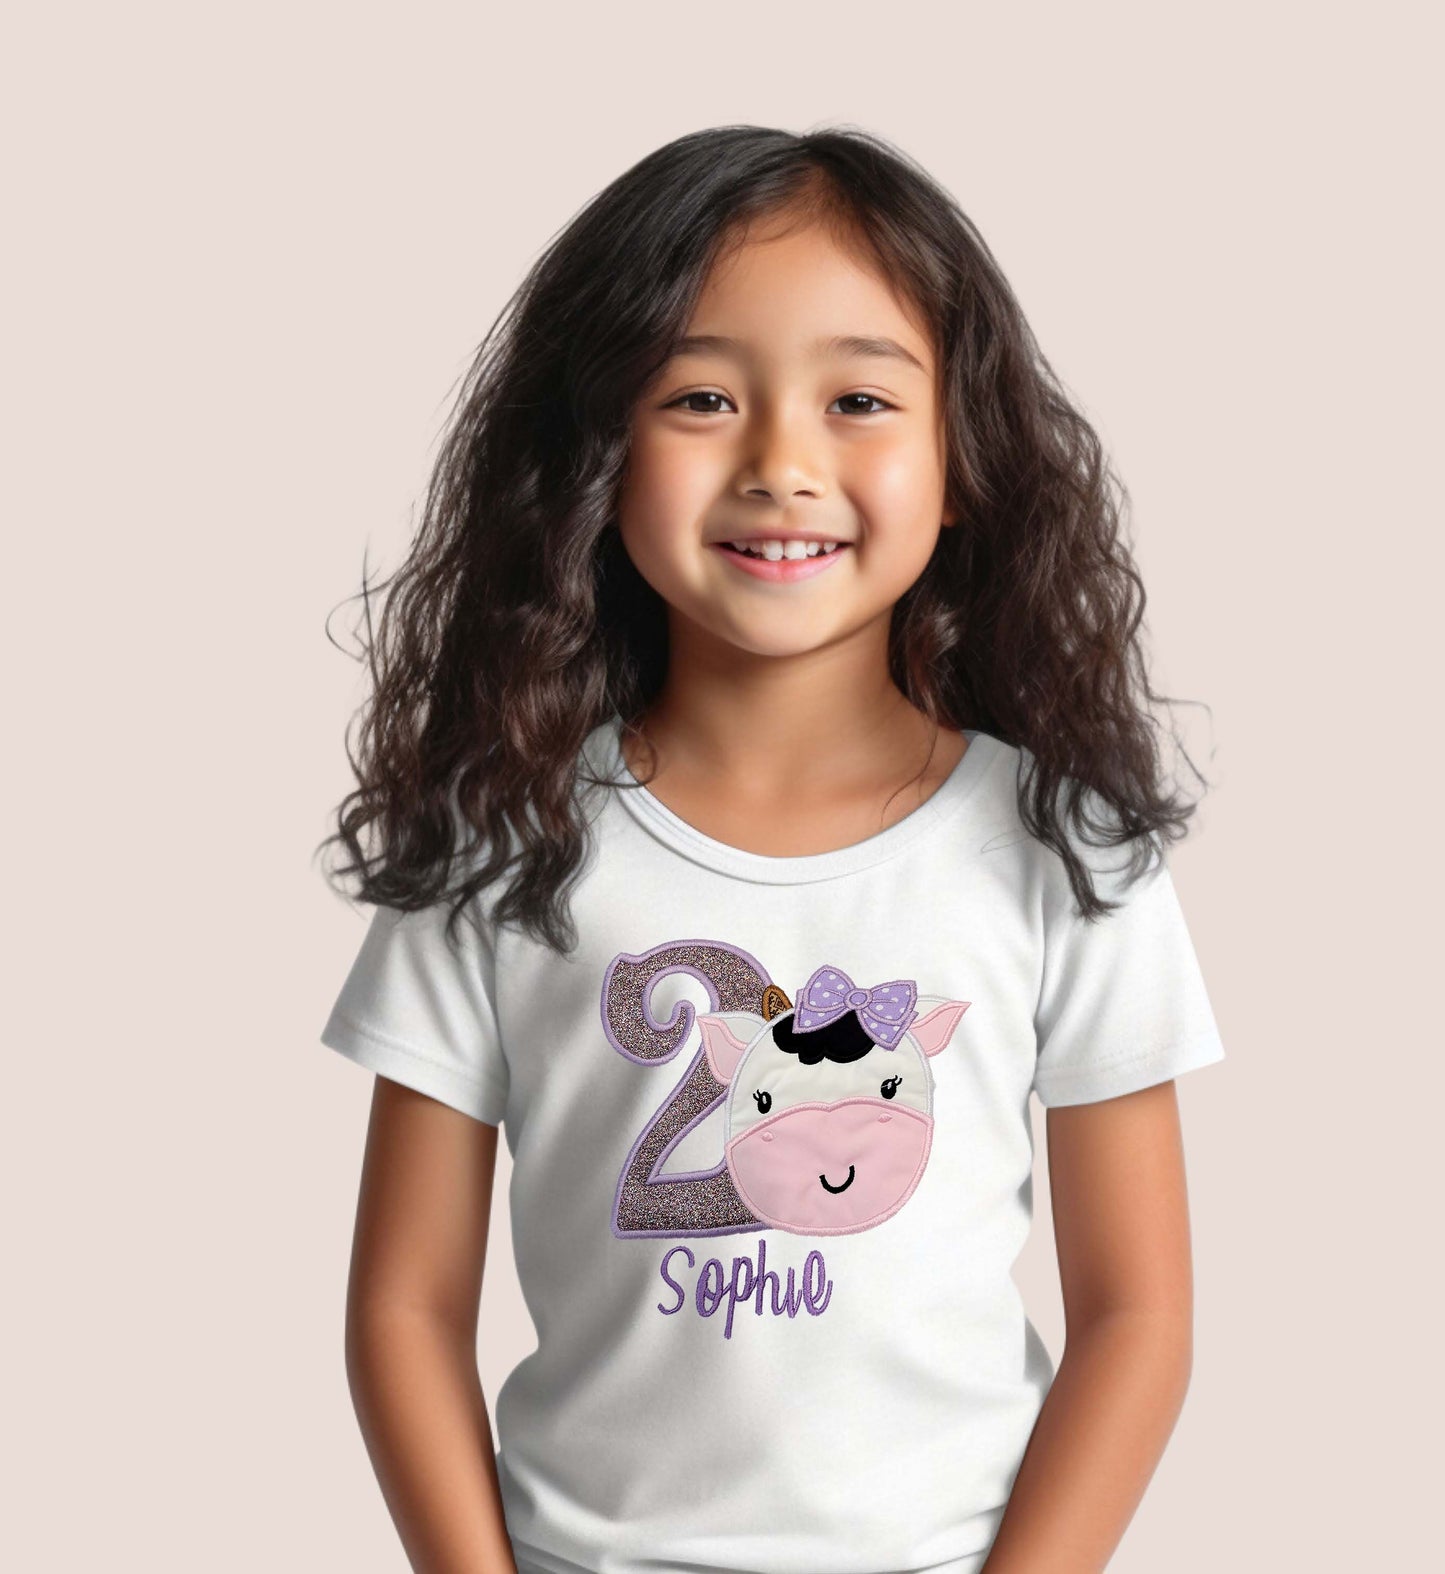 Personalized Birthday Shirt embroidered cow 